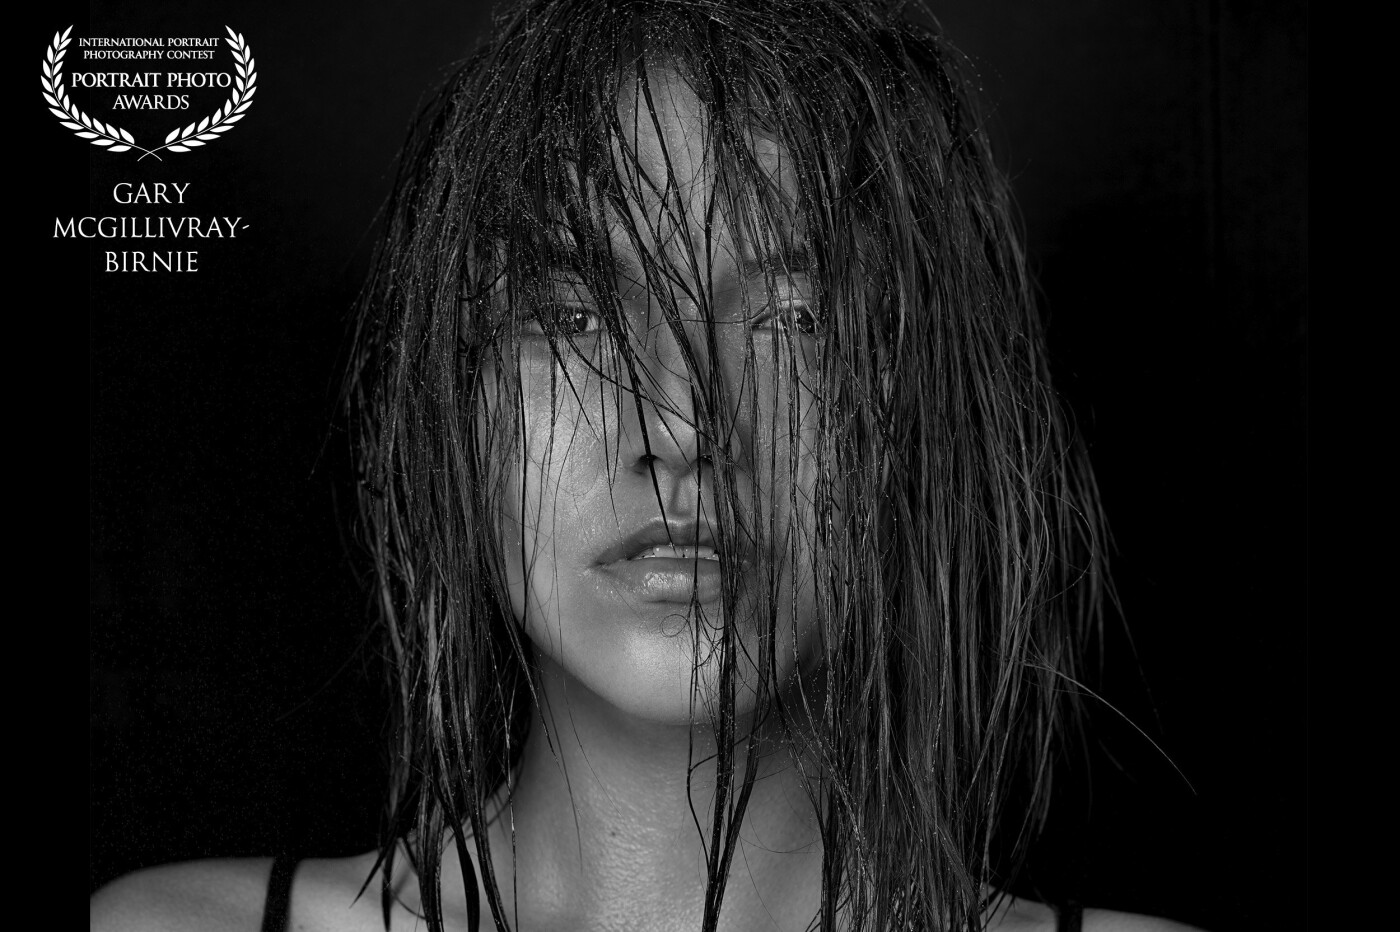 This image was transpired after the initial 4-hour photographic session with a local artist and his artwork.<br />
In this closeup shot, the model shows off her beauty, even with no makeup and only dampened hair. <br />
<br />
Photographer: Gary McGillivray-Birnie<br />
Model: @lebedeva.polina.lp @ks_models_atyrau <br />
<br />
Hasselblad H6D-50c Lens: 150 mm<br />
ISO: 100, Aperture: f/11, Shutter: 1/320s <br />
Lighting: Profoto D2 with 5' octabox and B1x with 3' octabox<br />
<br />
www.mcgillivraybirniephotography.com<br />
Instagram: @mcgillivraybirniephotography